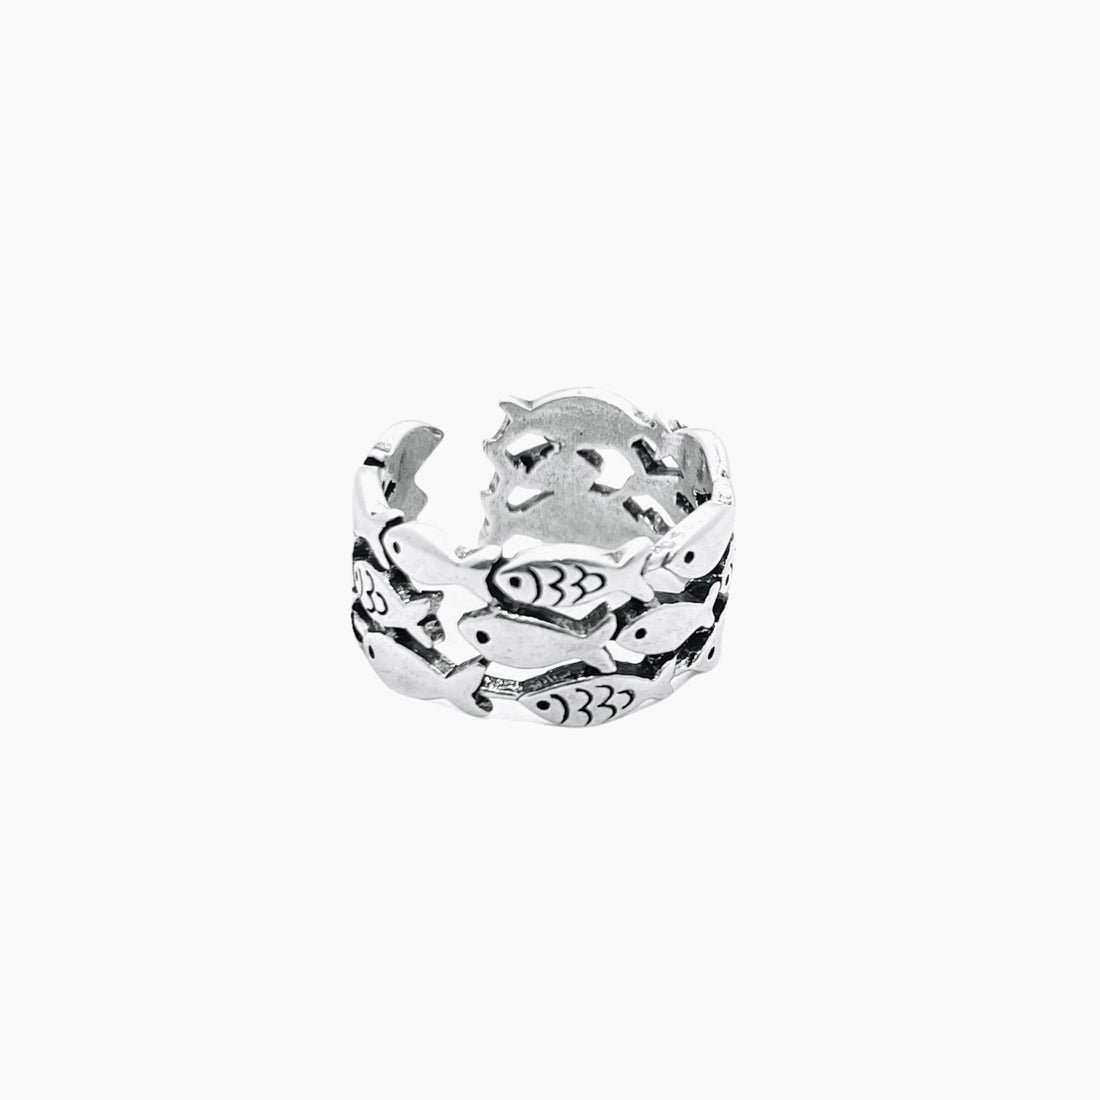 3 layers fish adjustable silver pinky ring